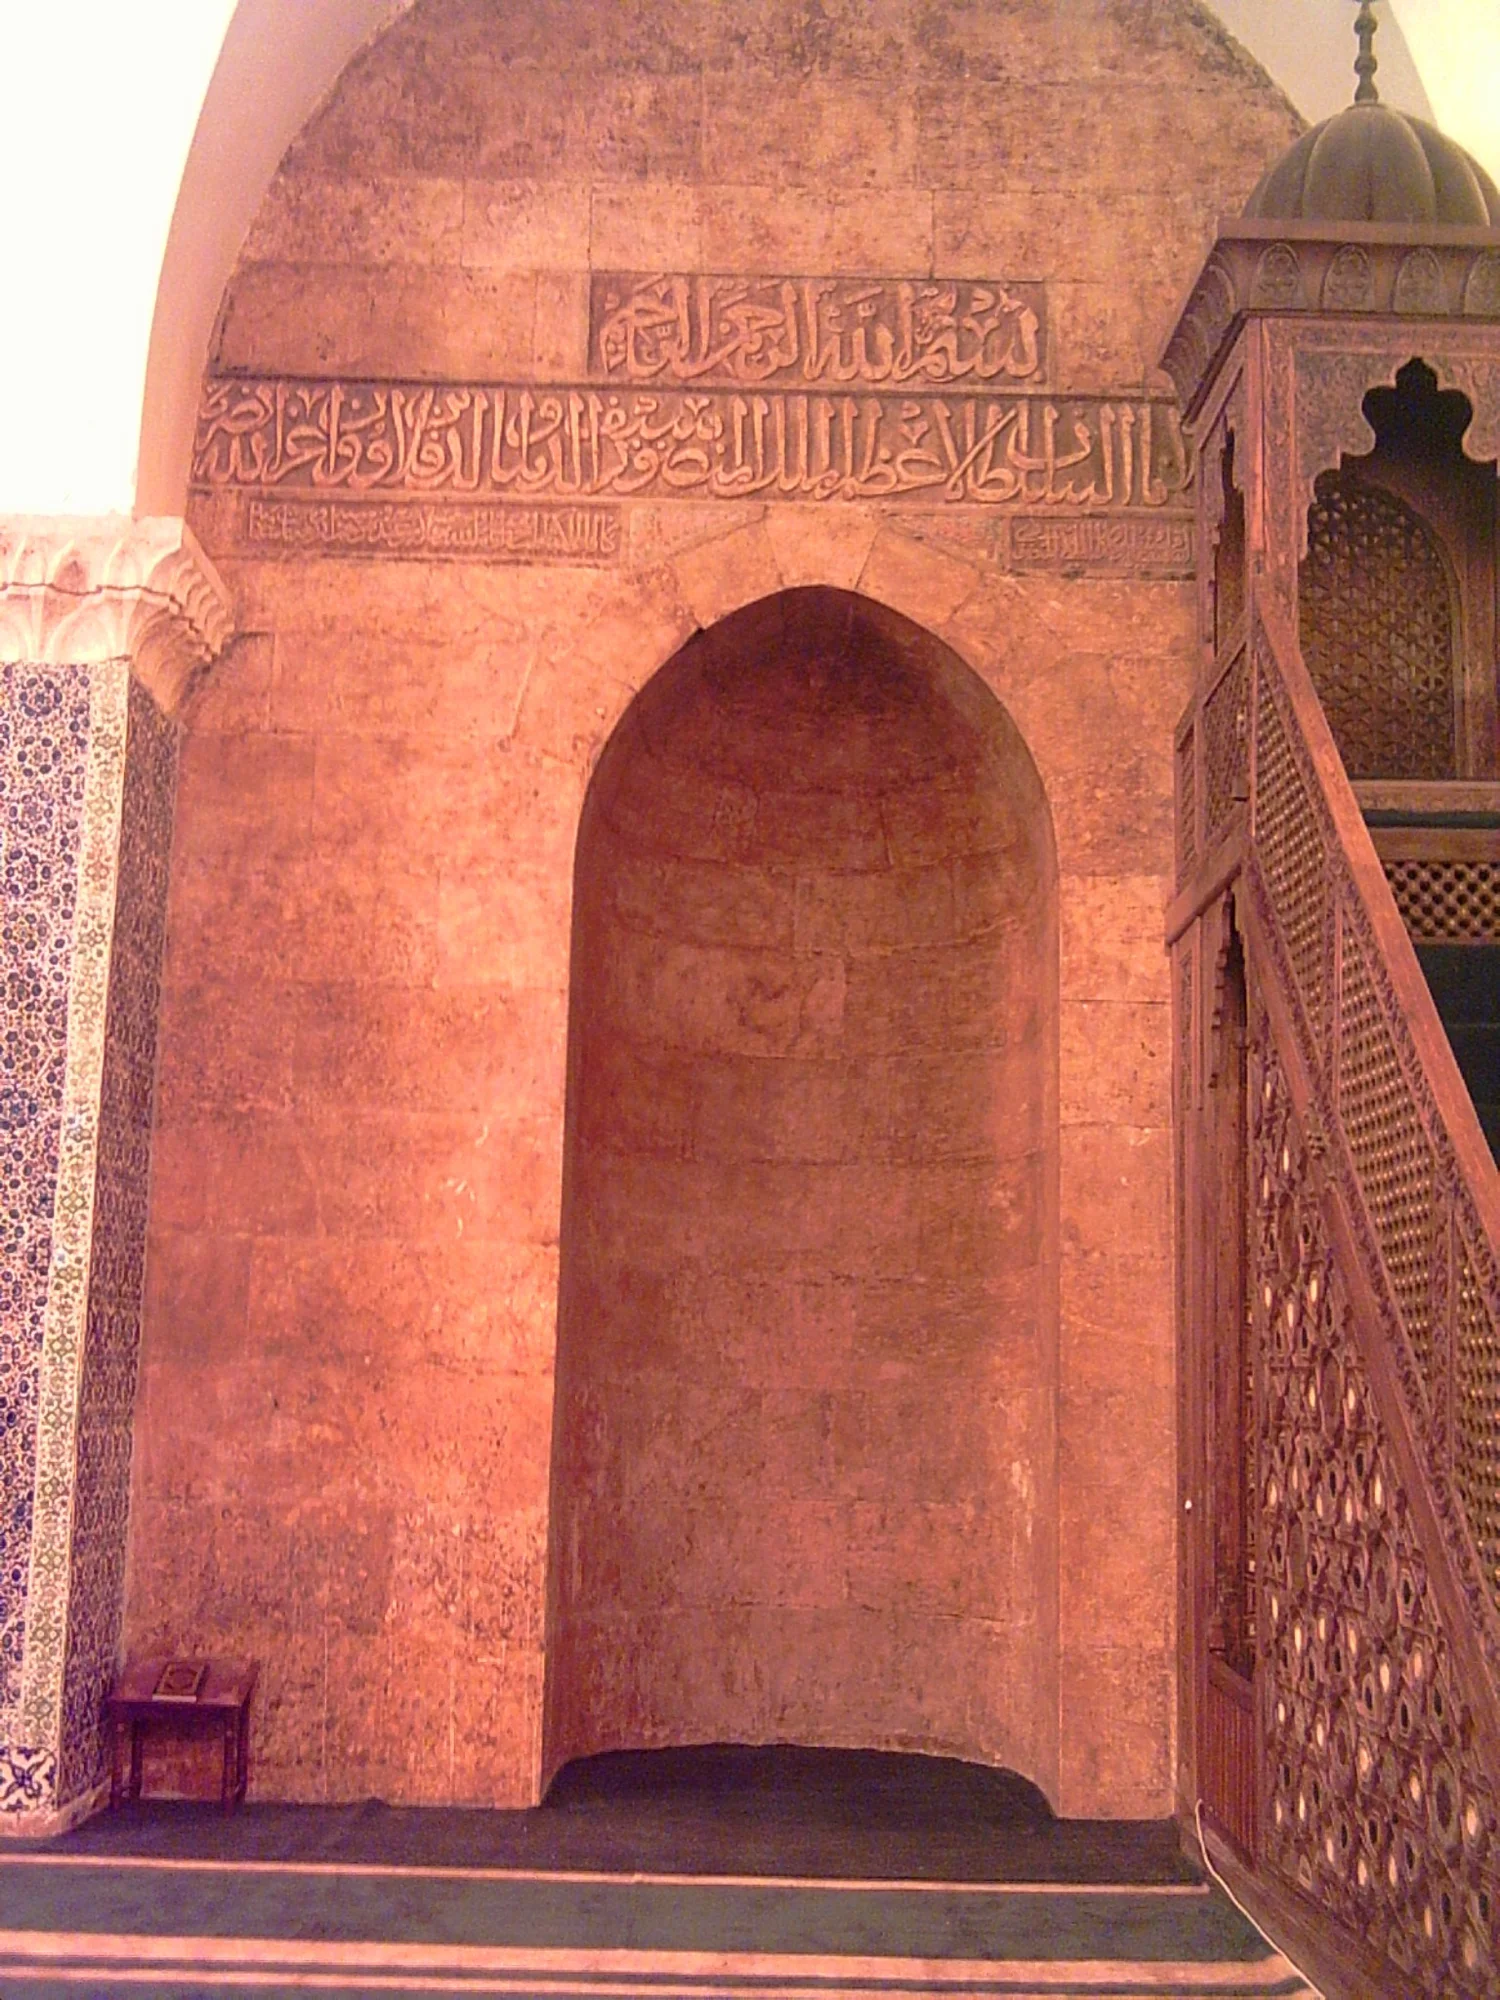 The prayer niche and the pulpit in the middle of the south wall in the prayer hall of the Great Umayyad Mosque of Aleppo